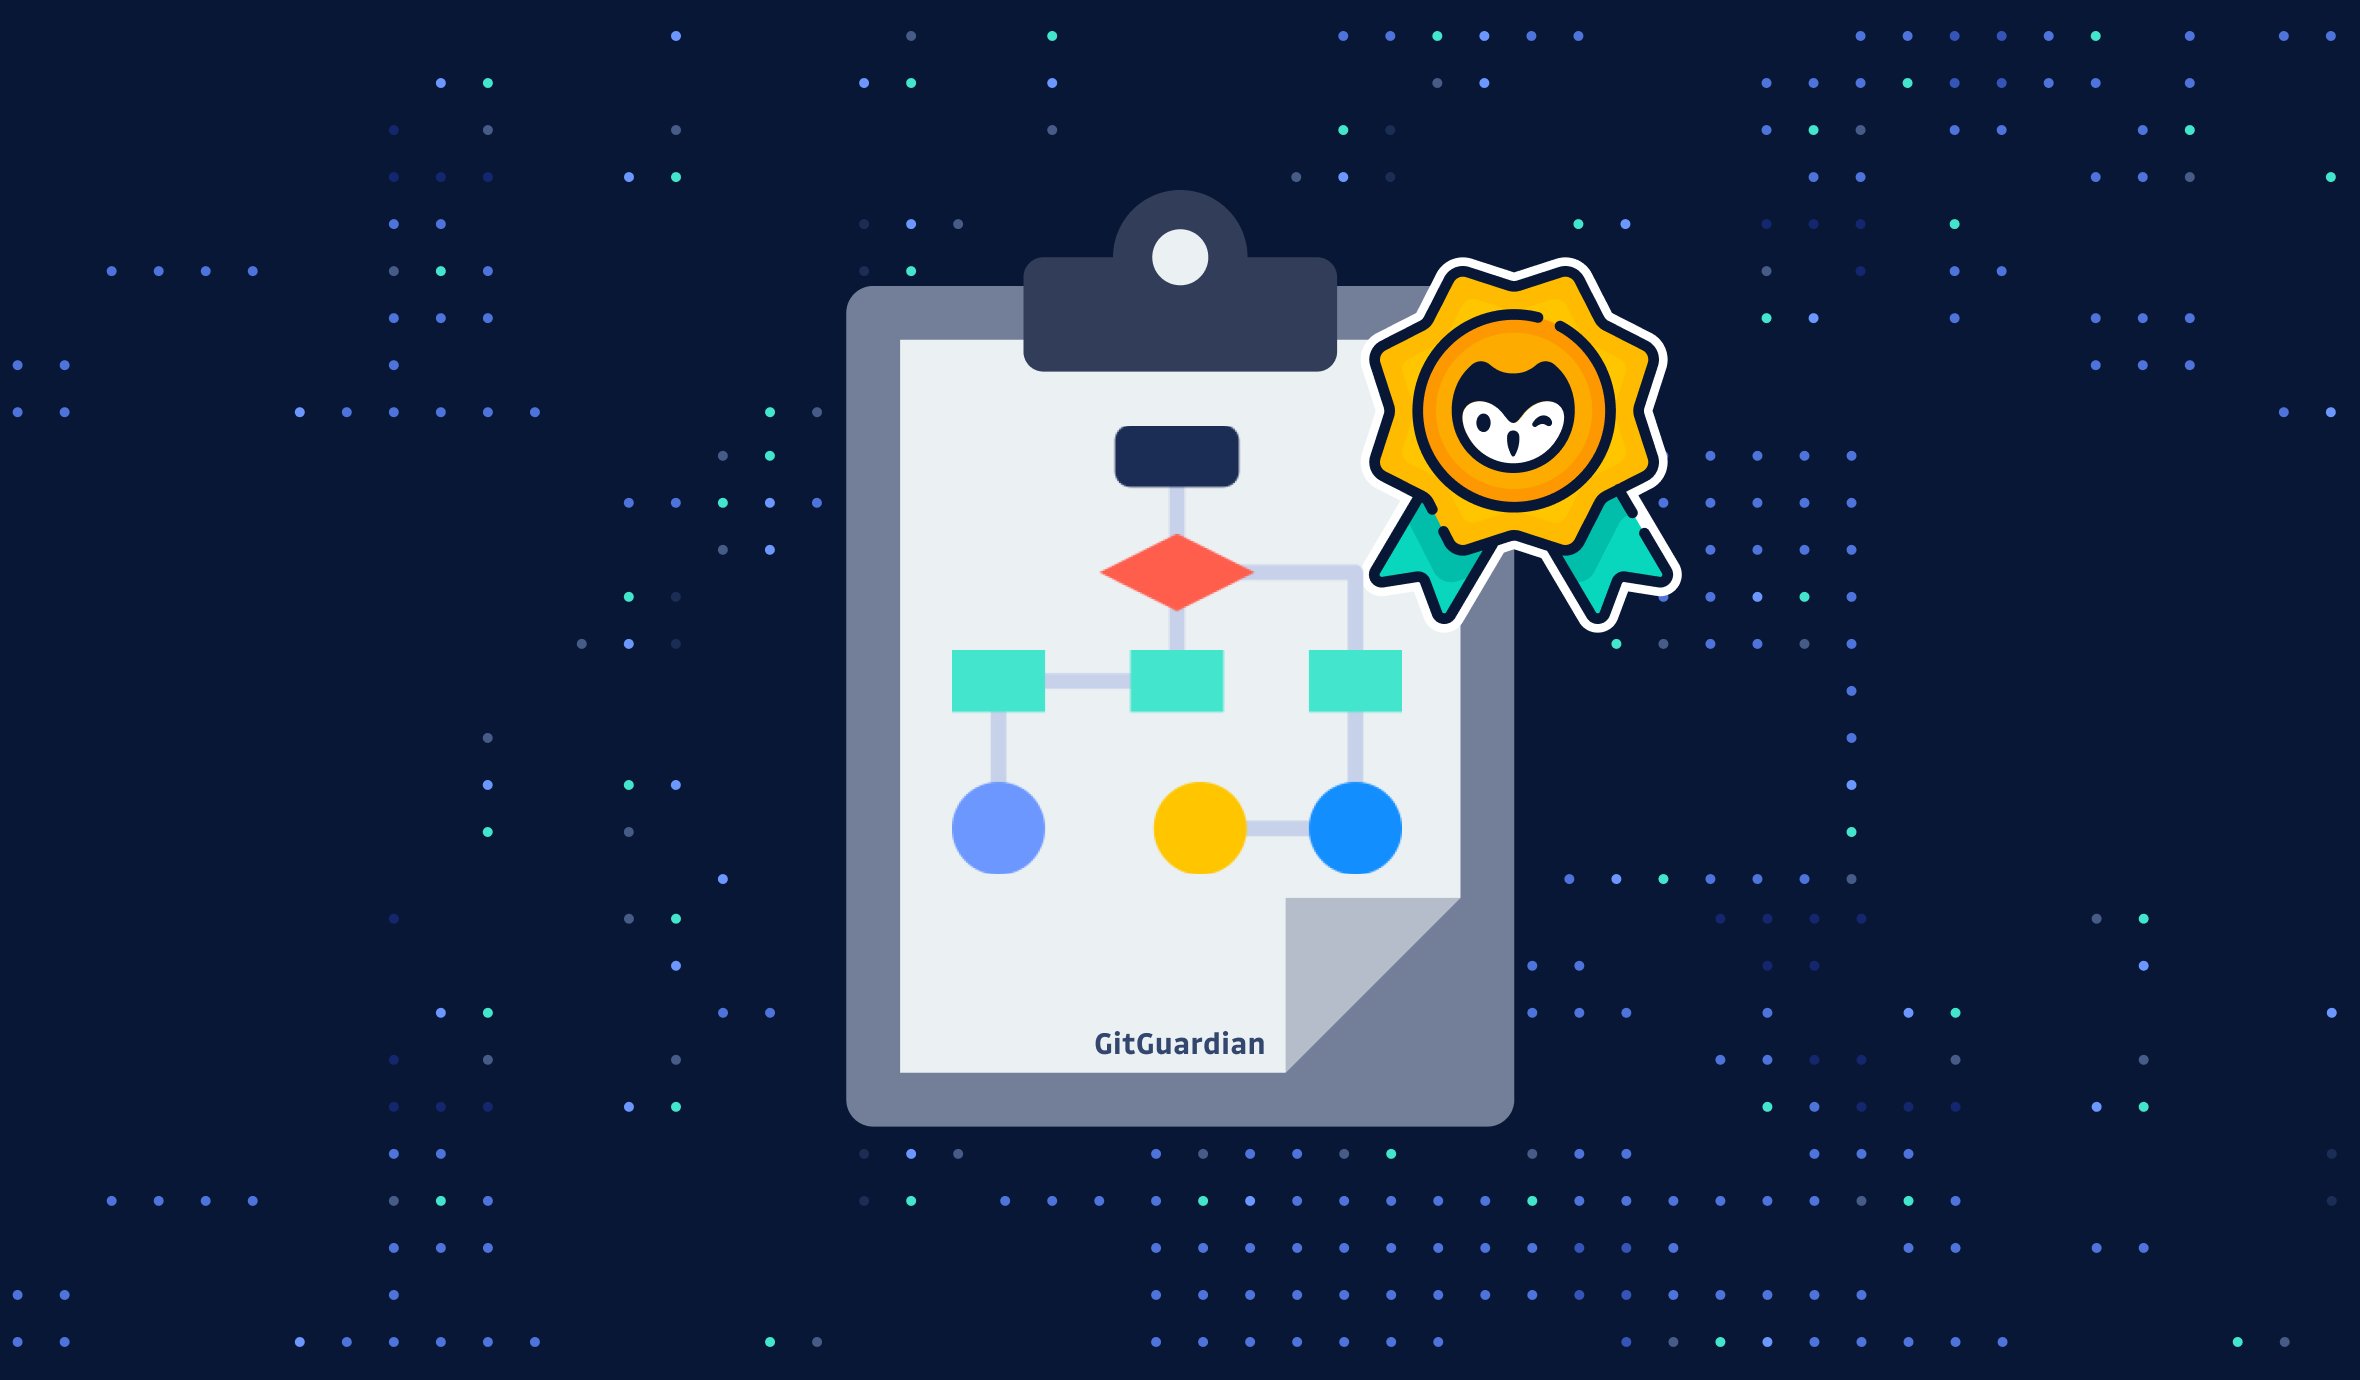 Rewriting your git history, removing files permanently - cheatsheet & guide